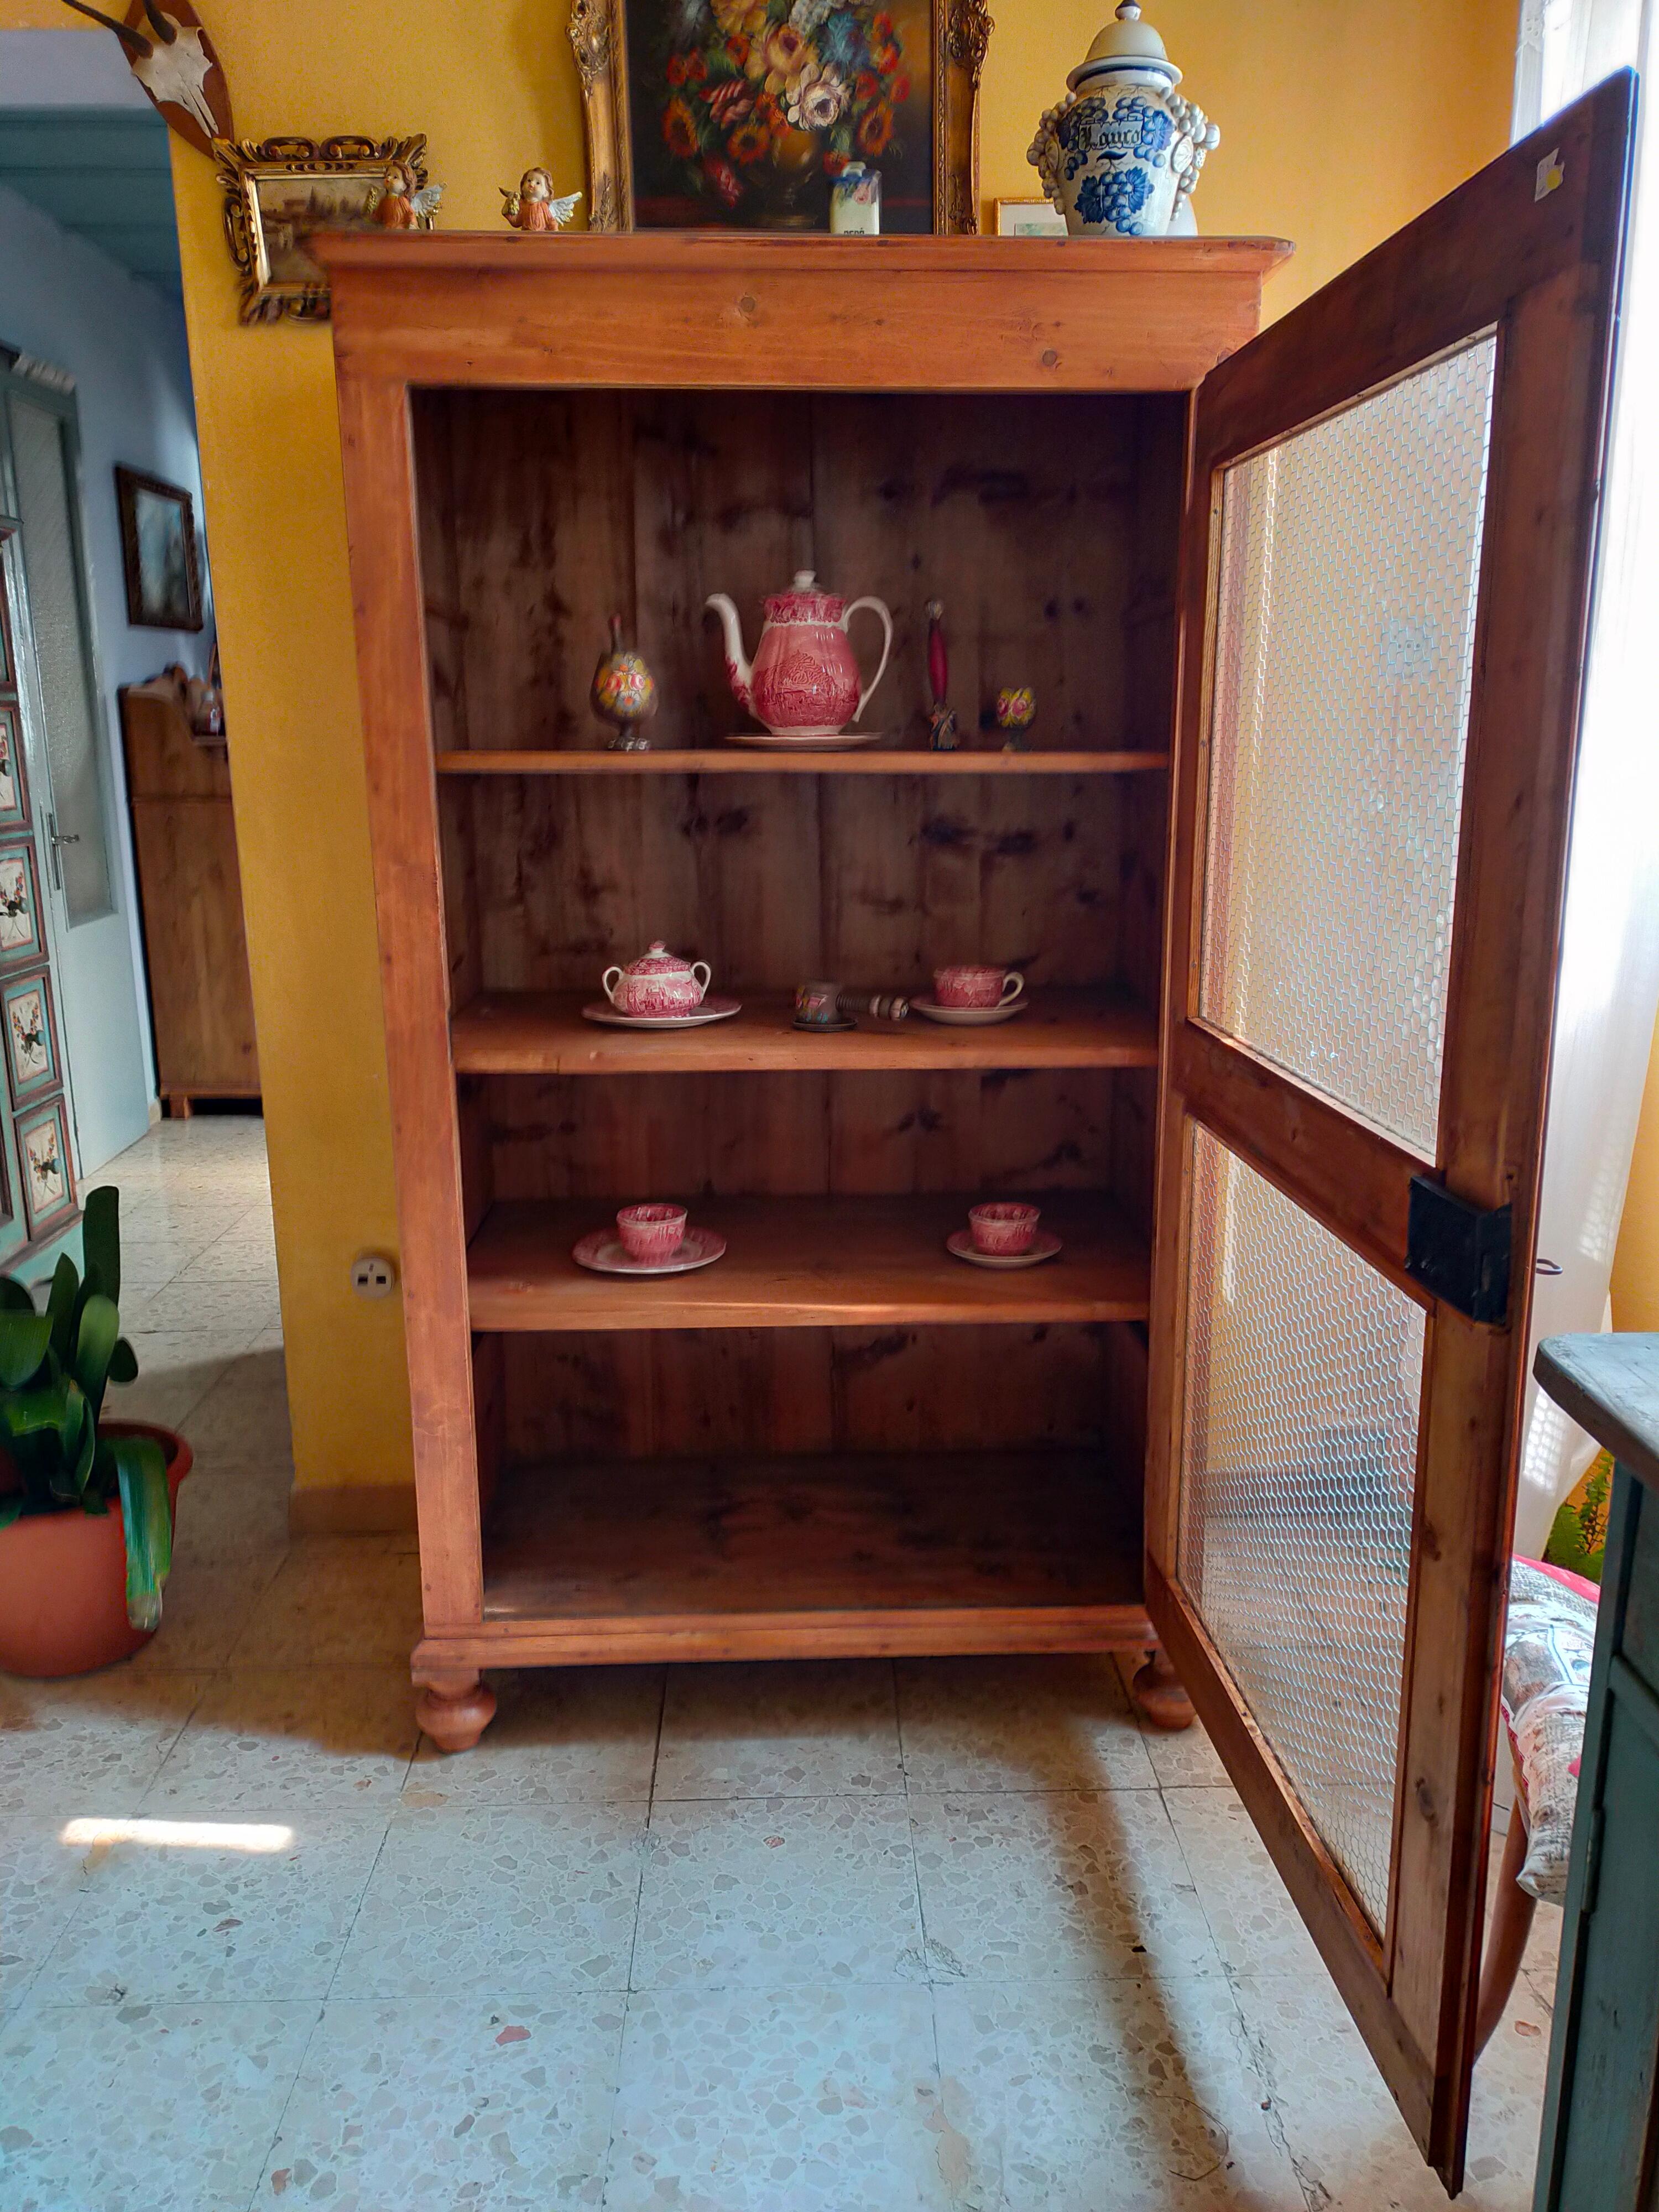 Sideboard / pantry with 3 interior shelves with secrets.
Door with wire mesh and interior glass.
Wax finish.
Original hardware.
Measurements at the frame.

Other information or photos at customer's request.

